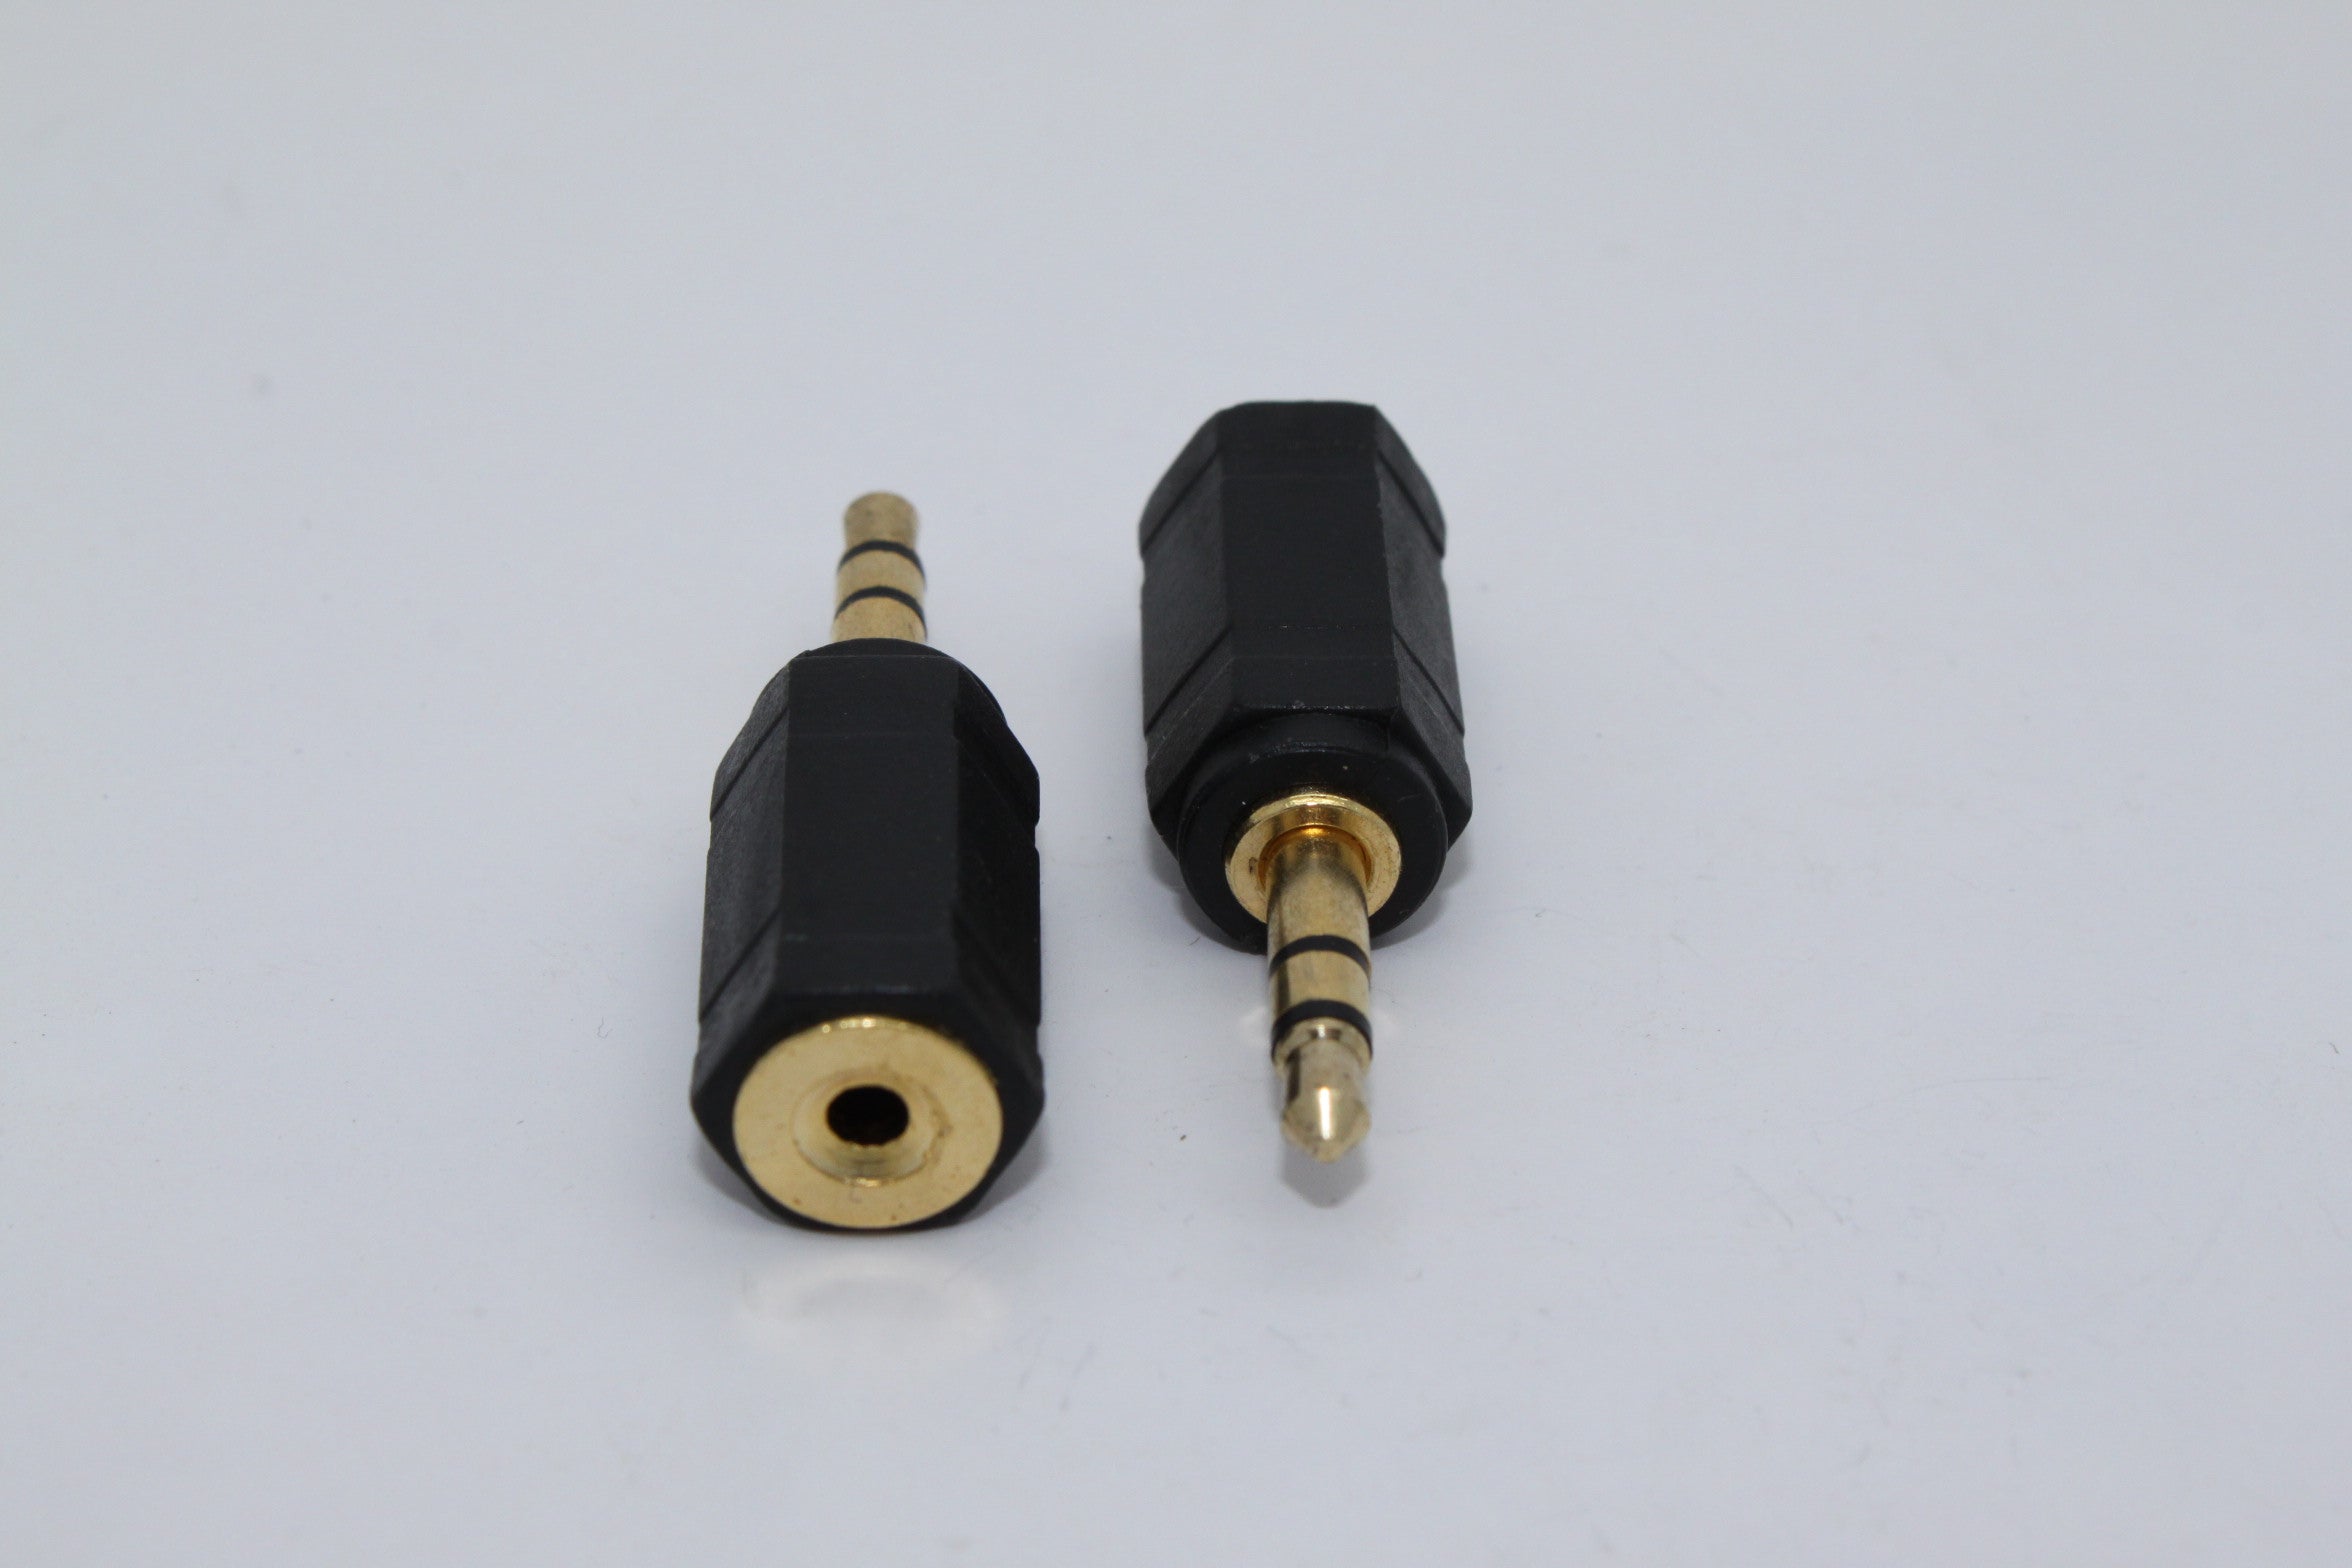 2.5mm Female Stereo to 3.5mm Male Stereo Adapter Cyberdyne Audio Accessories